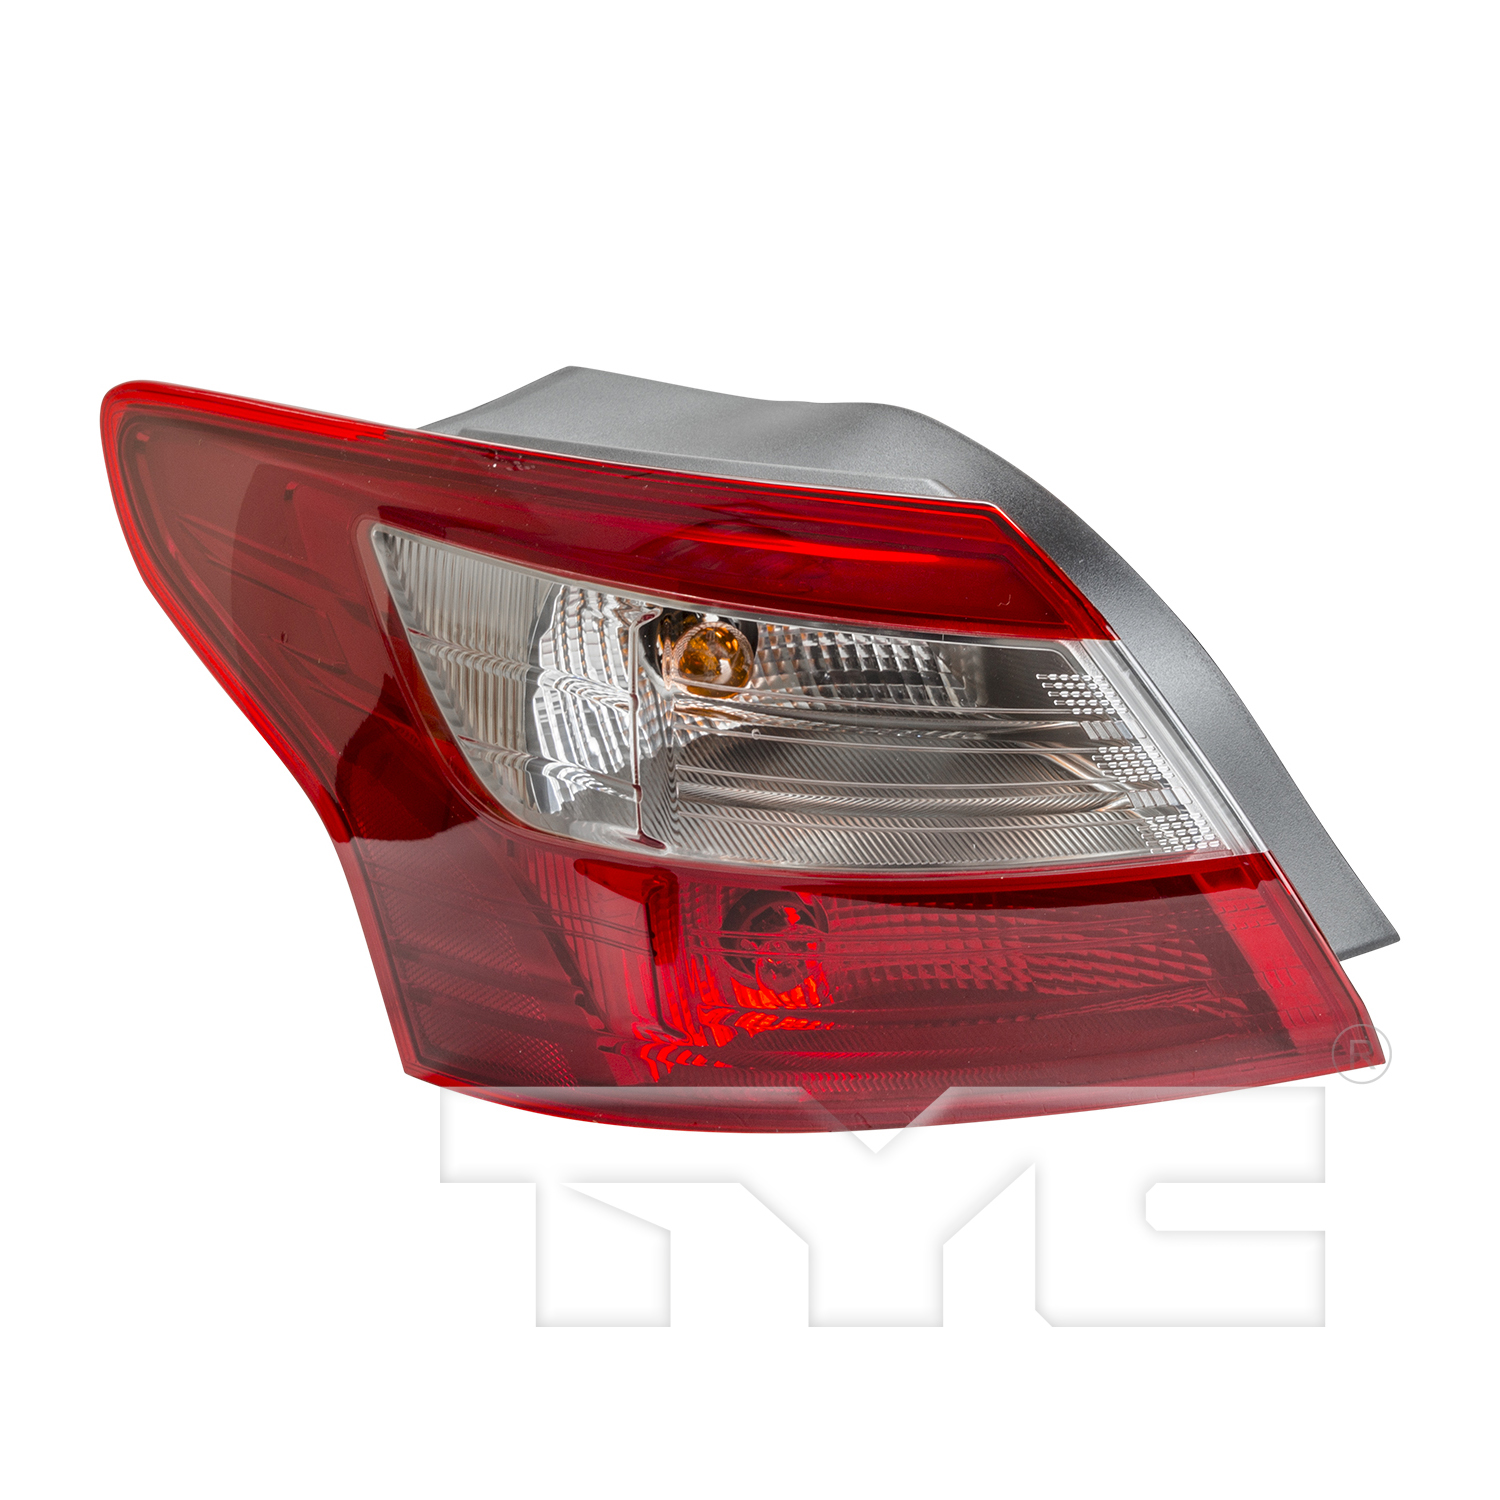 Aftermarket TAILLIGHTS for FORD - FOCUS, FOCUS,12-14,LT Taillamp lens/housing